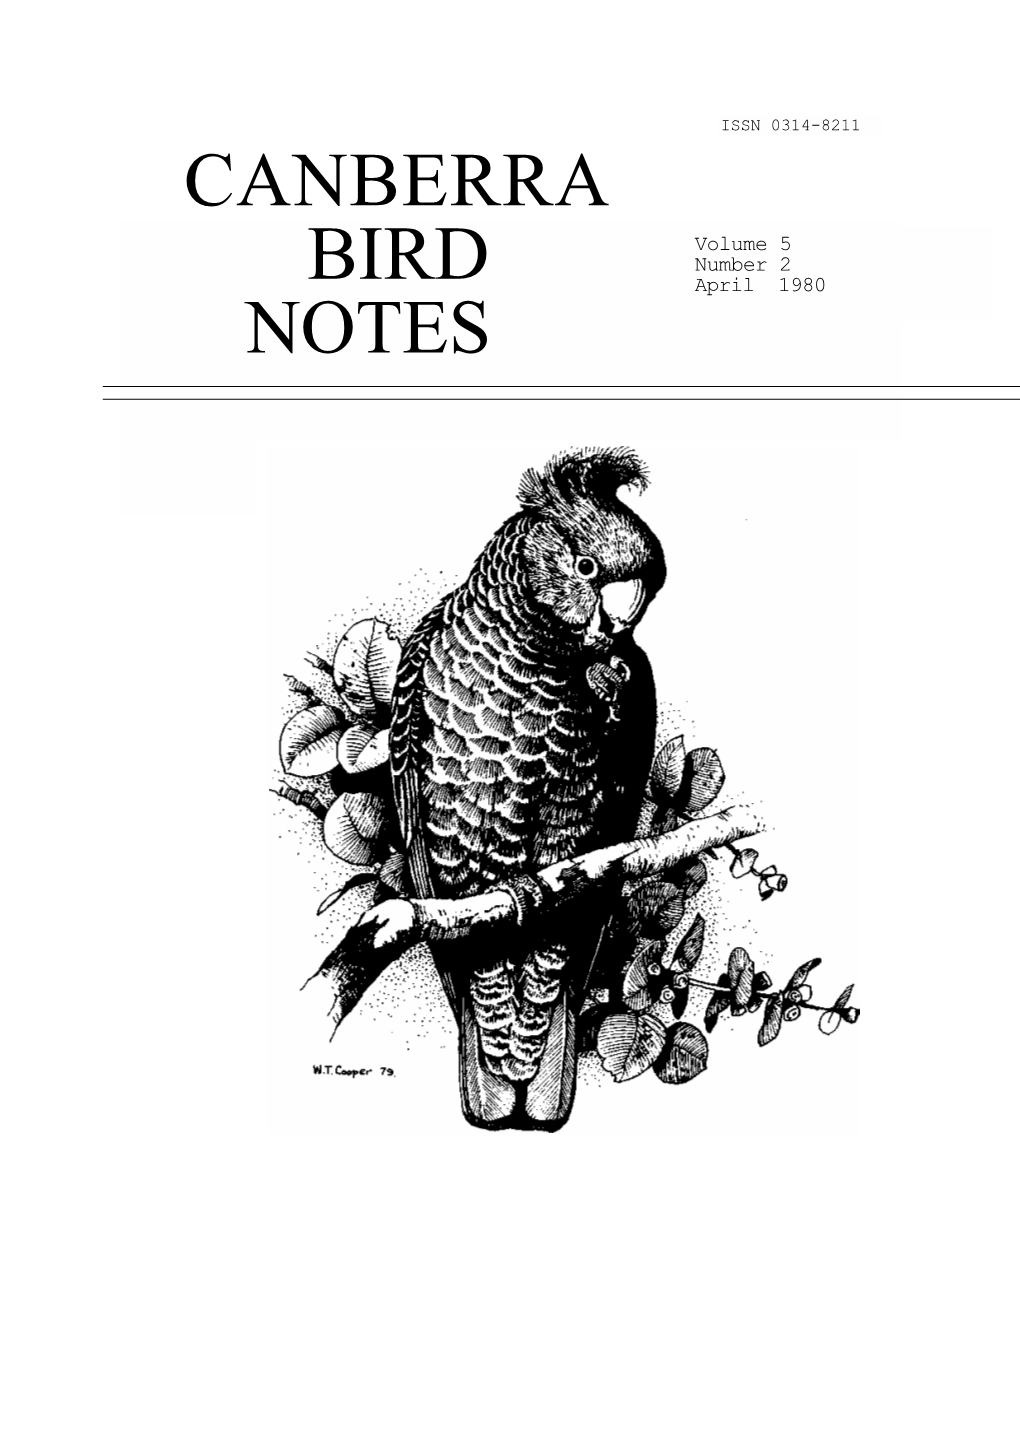 Canberra Bird Notes and Occupied the Office of Assistant Editor, Our Publication Has Reached New Standards for Such a Journal